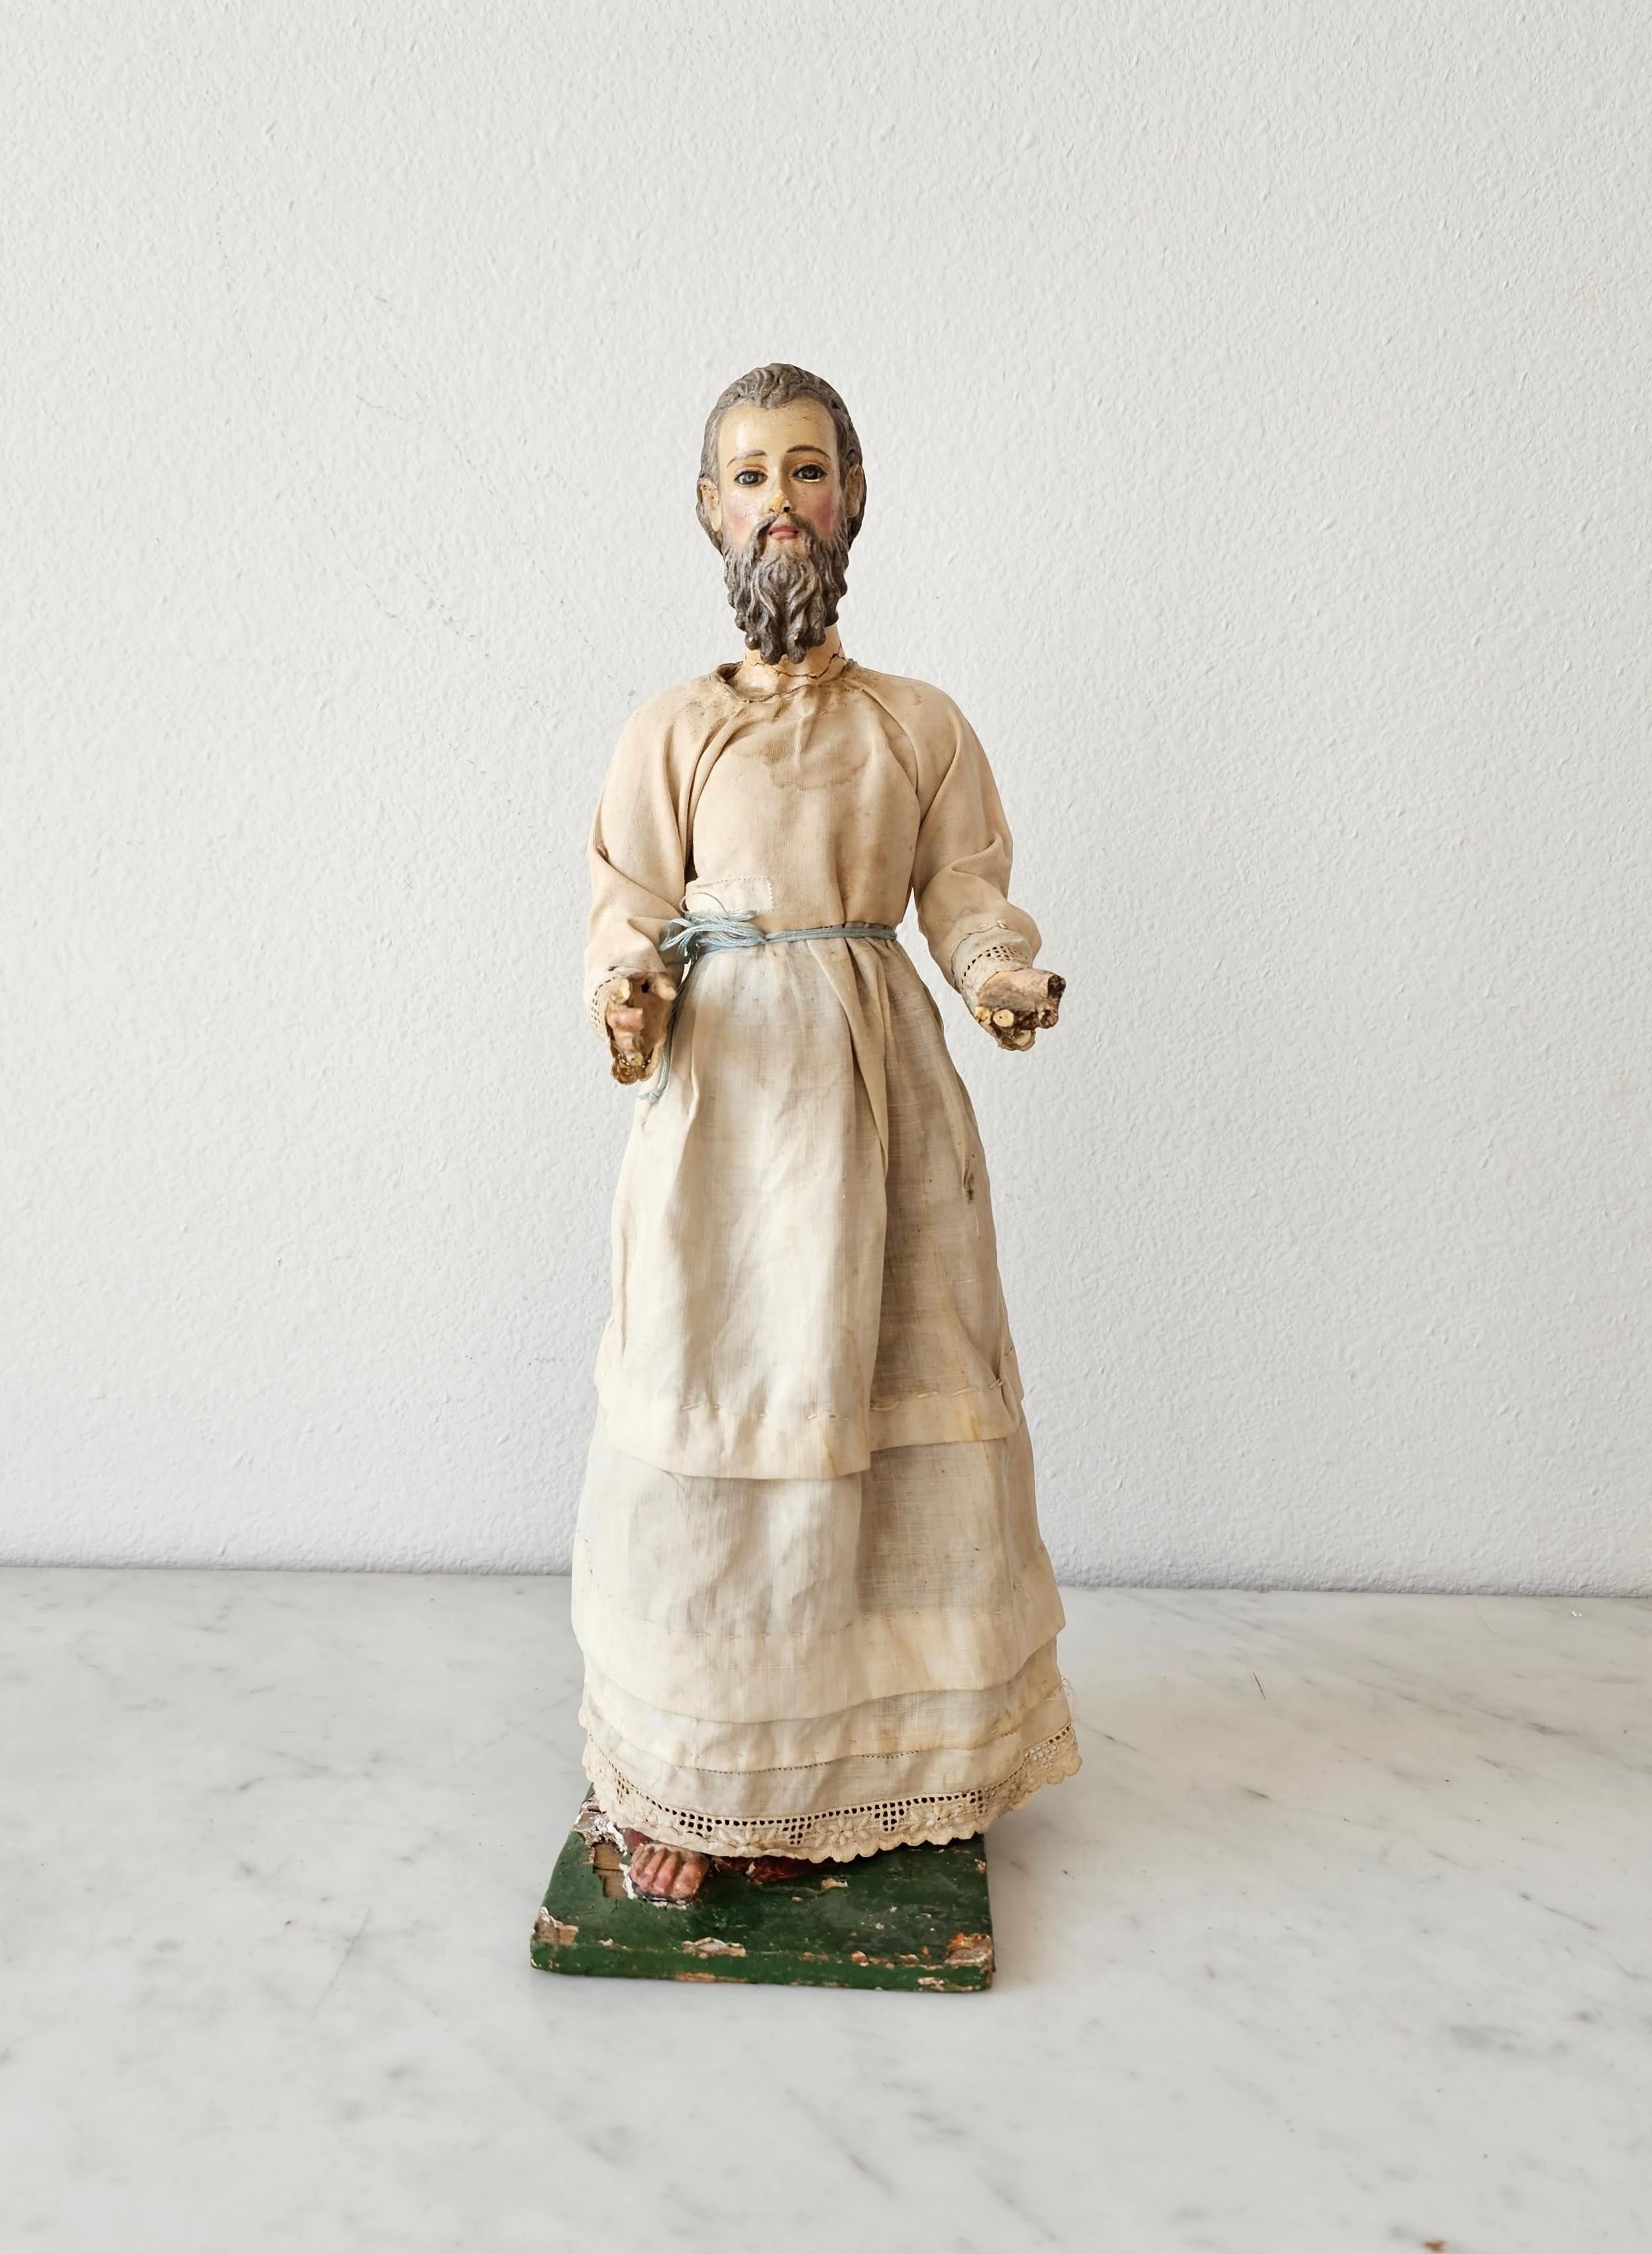 A scarce Baroque period Spanish or Italian hand carved polychrome painted wood Santo sculpture with inset colored glass eyes, original white robe garb and later wood rosary.

Intricate and highly realistic detailing, the exceptionally executed late